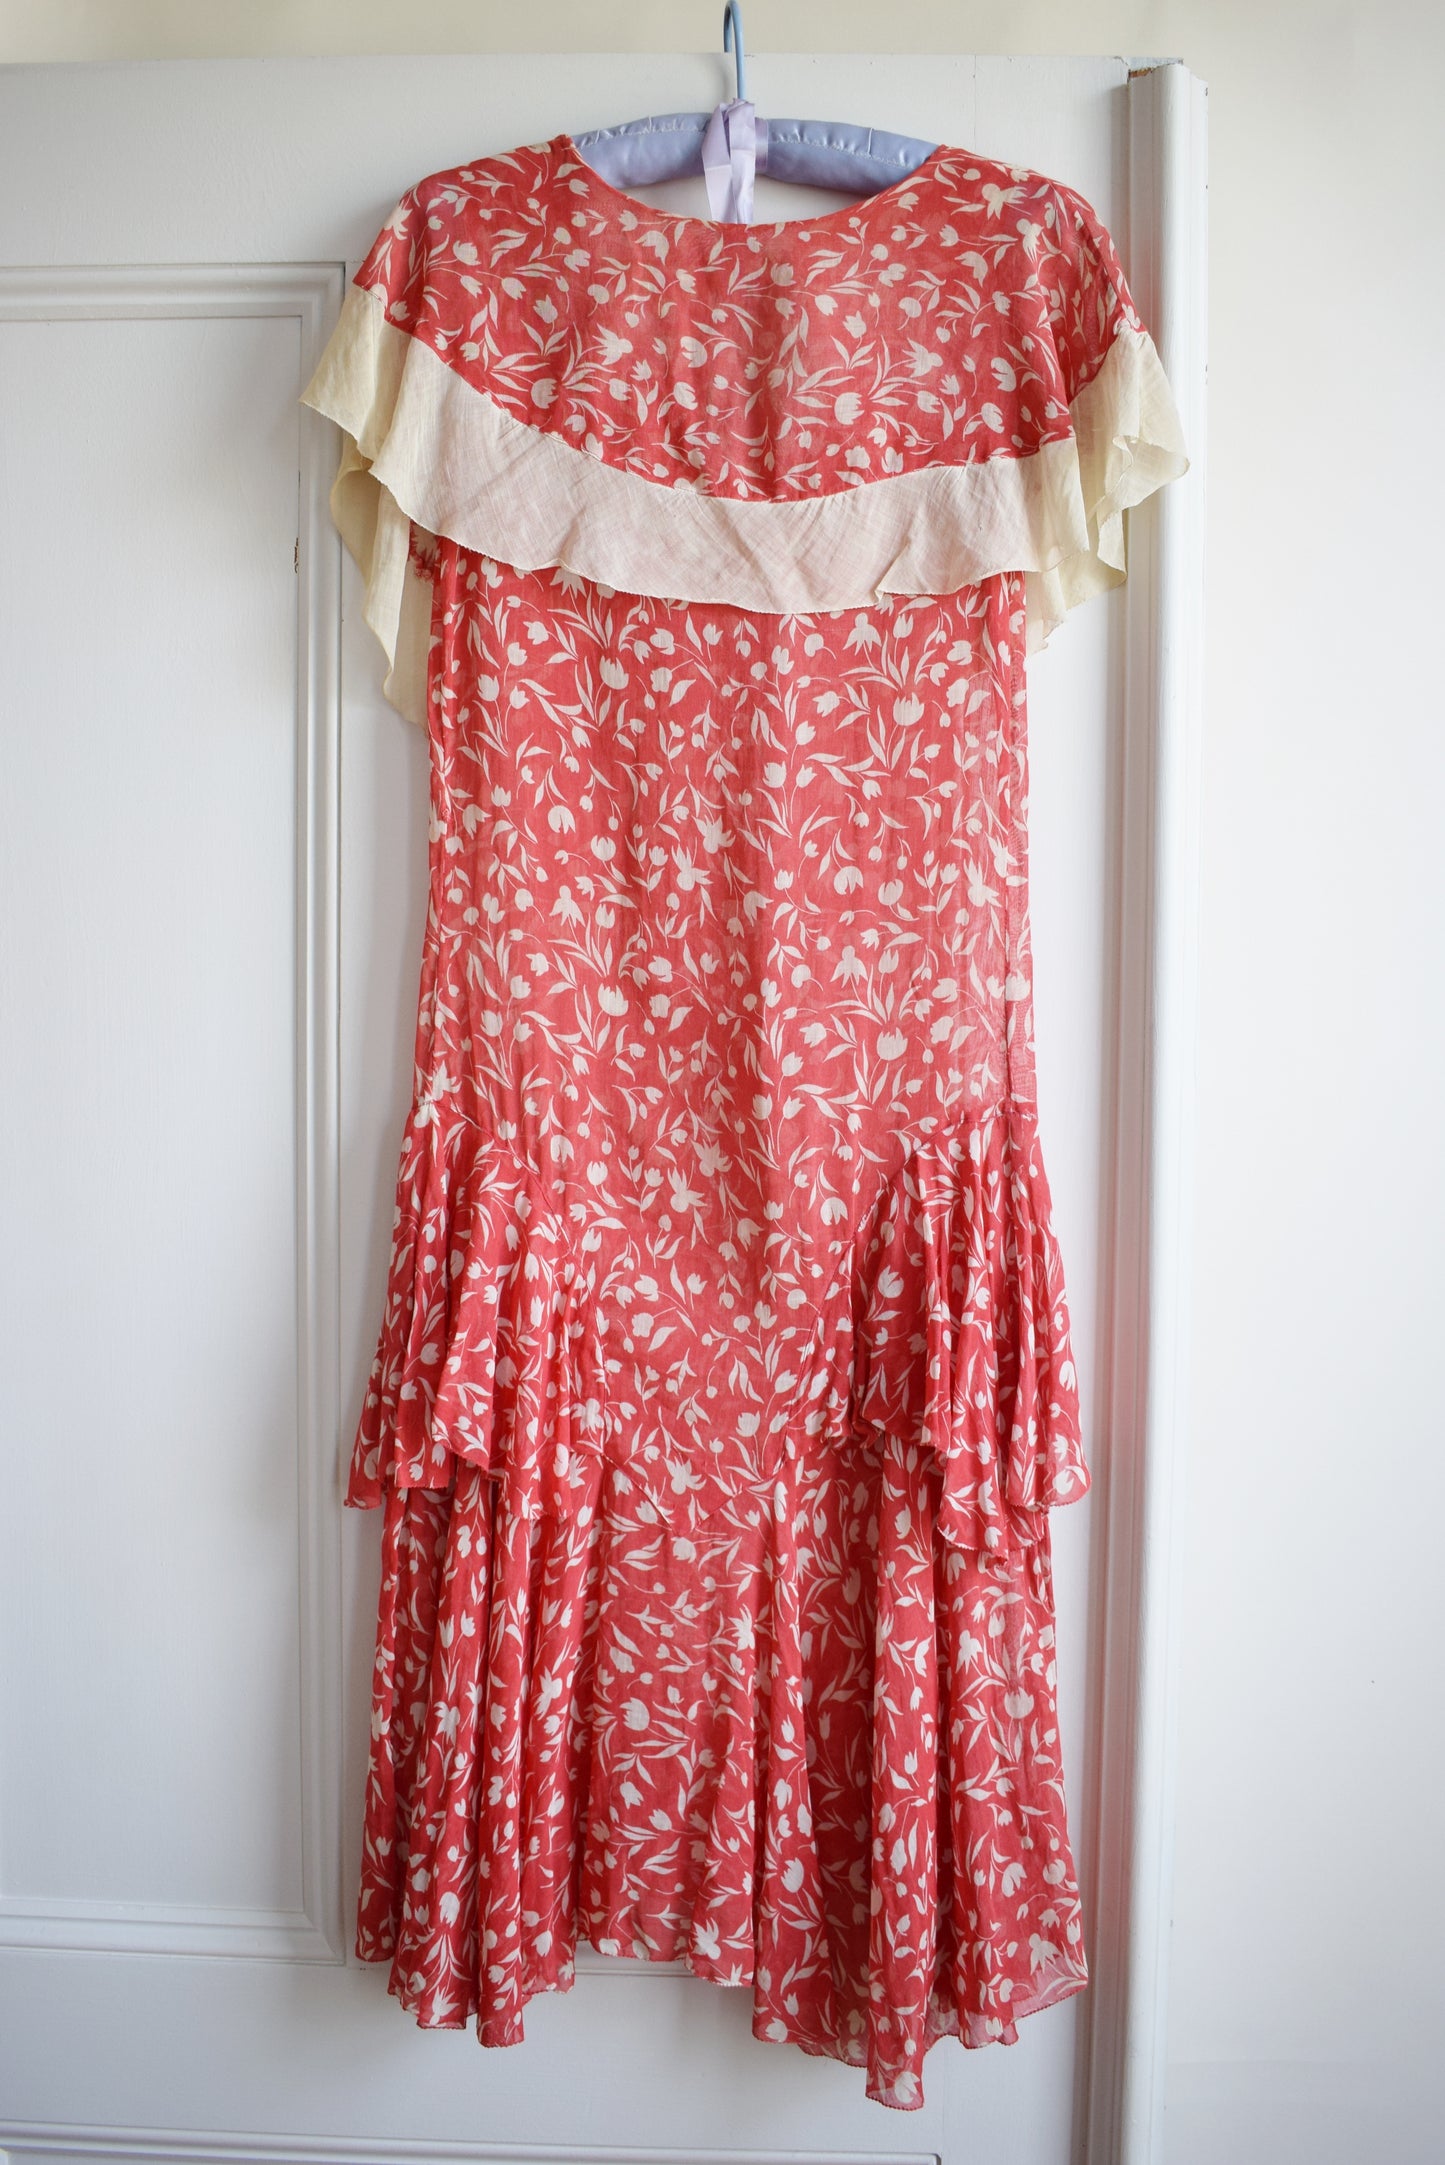 1920s/30s Red Floral Dress | wounded bird